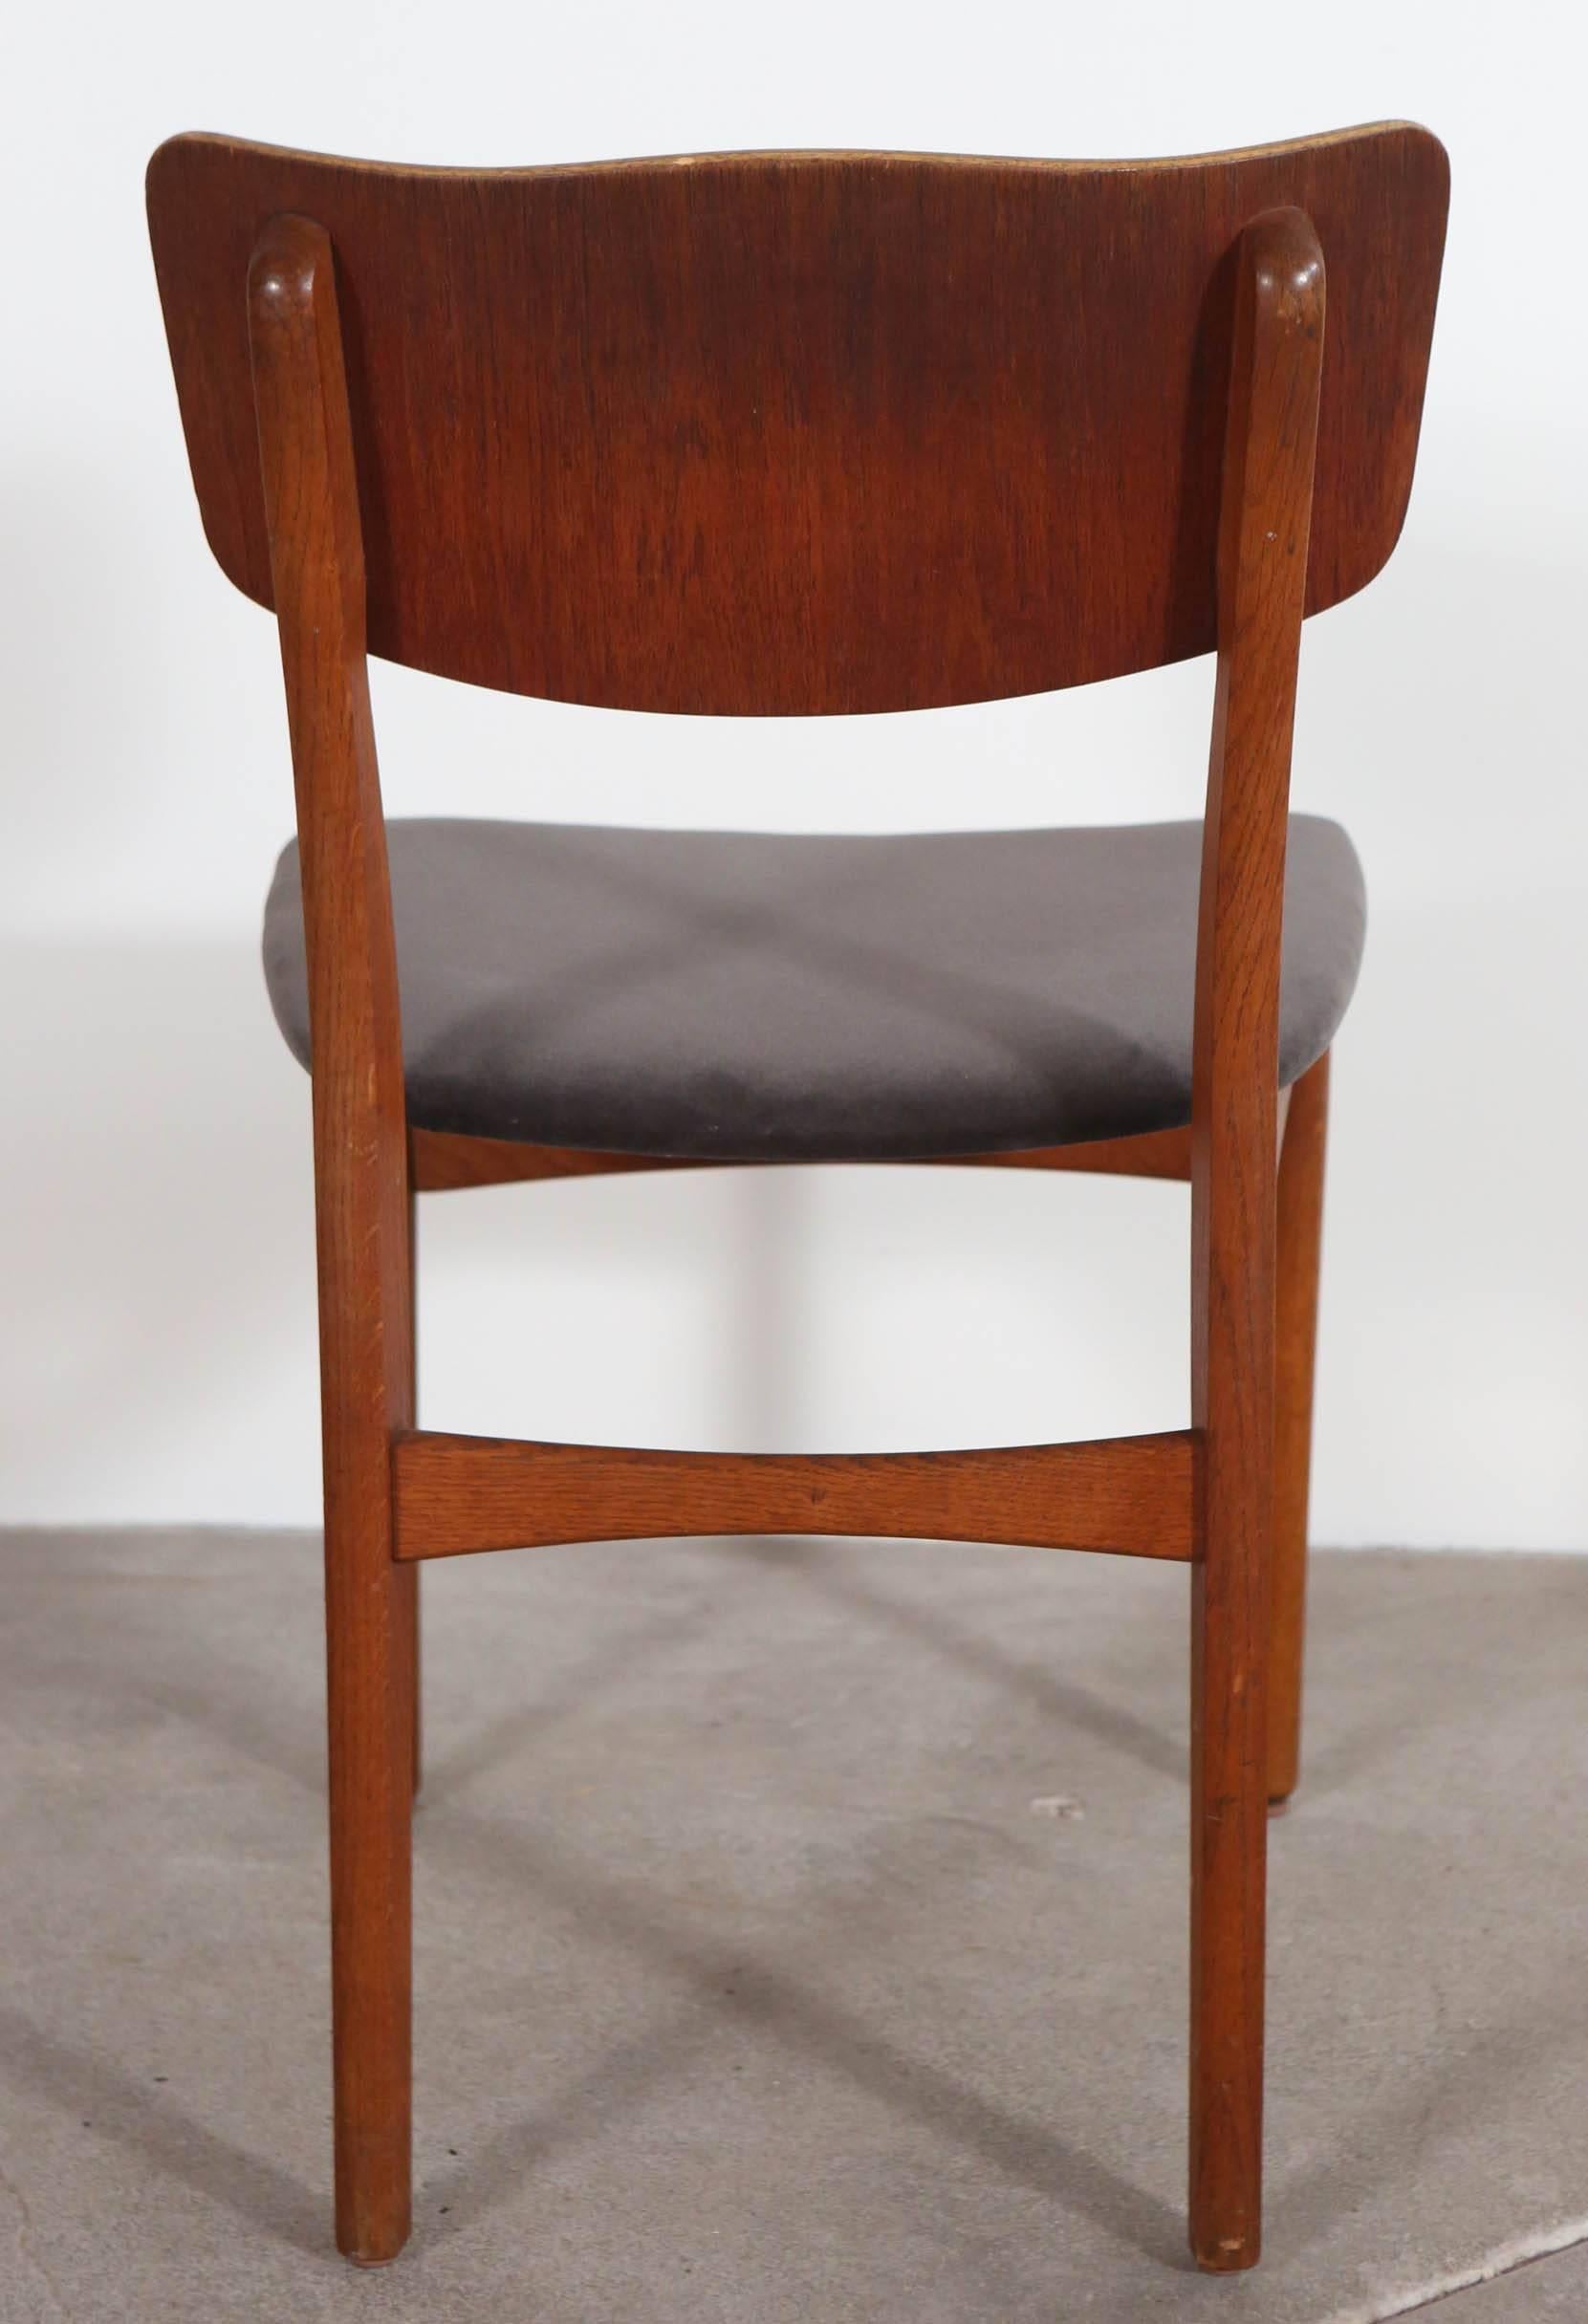 20th Century Mid-Century Teak Framed Dining Chairs with Velvet Seat Cushion